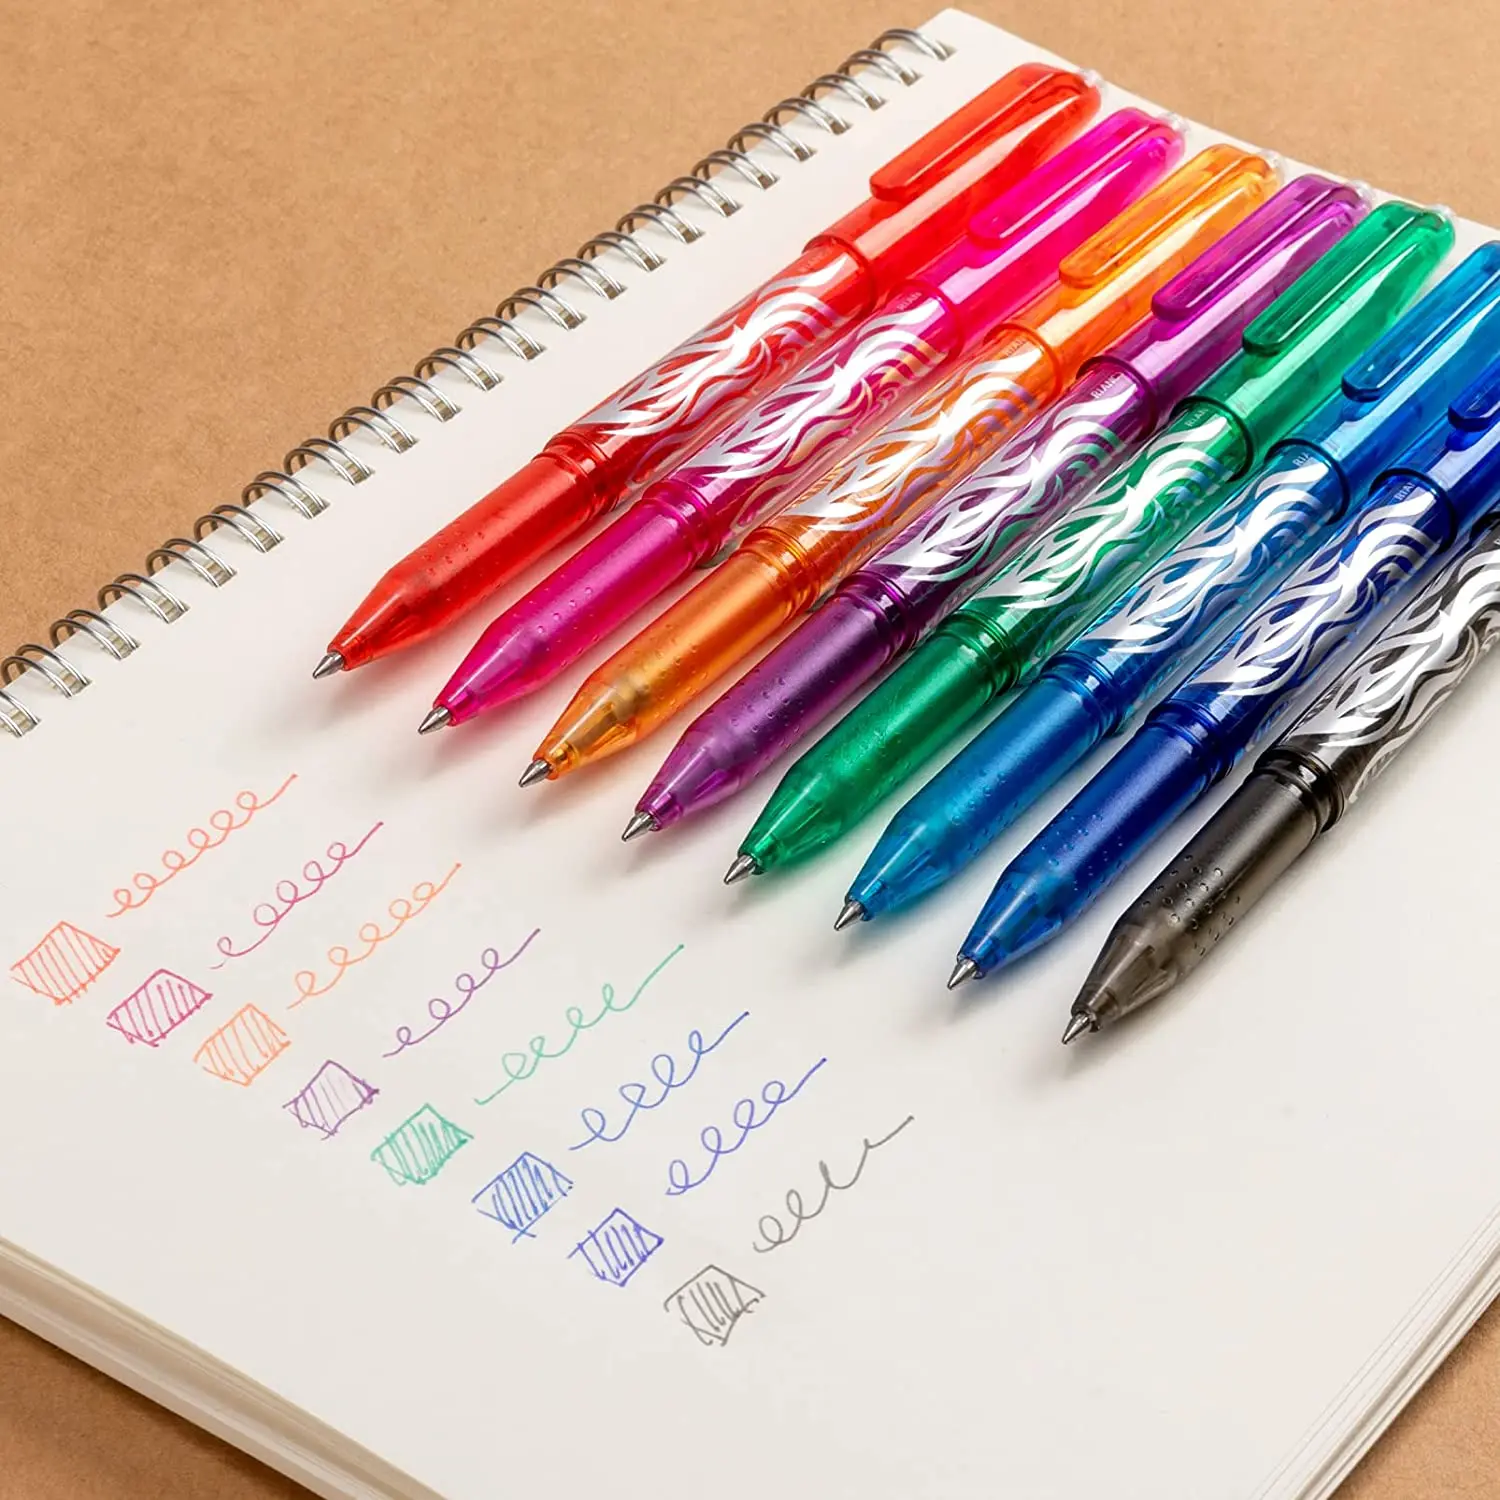 Erasable Pens Erasable multicolored Gel Ink Rolling Ball Extra Fine point Smooth Writing Pens 0.5mm pens For office school